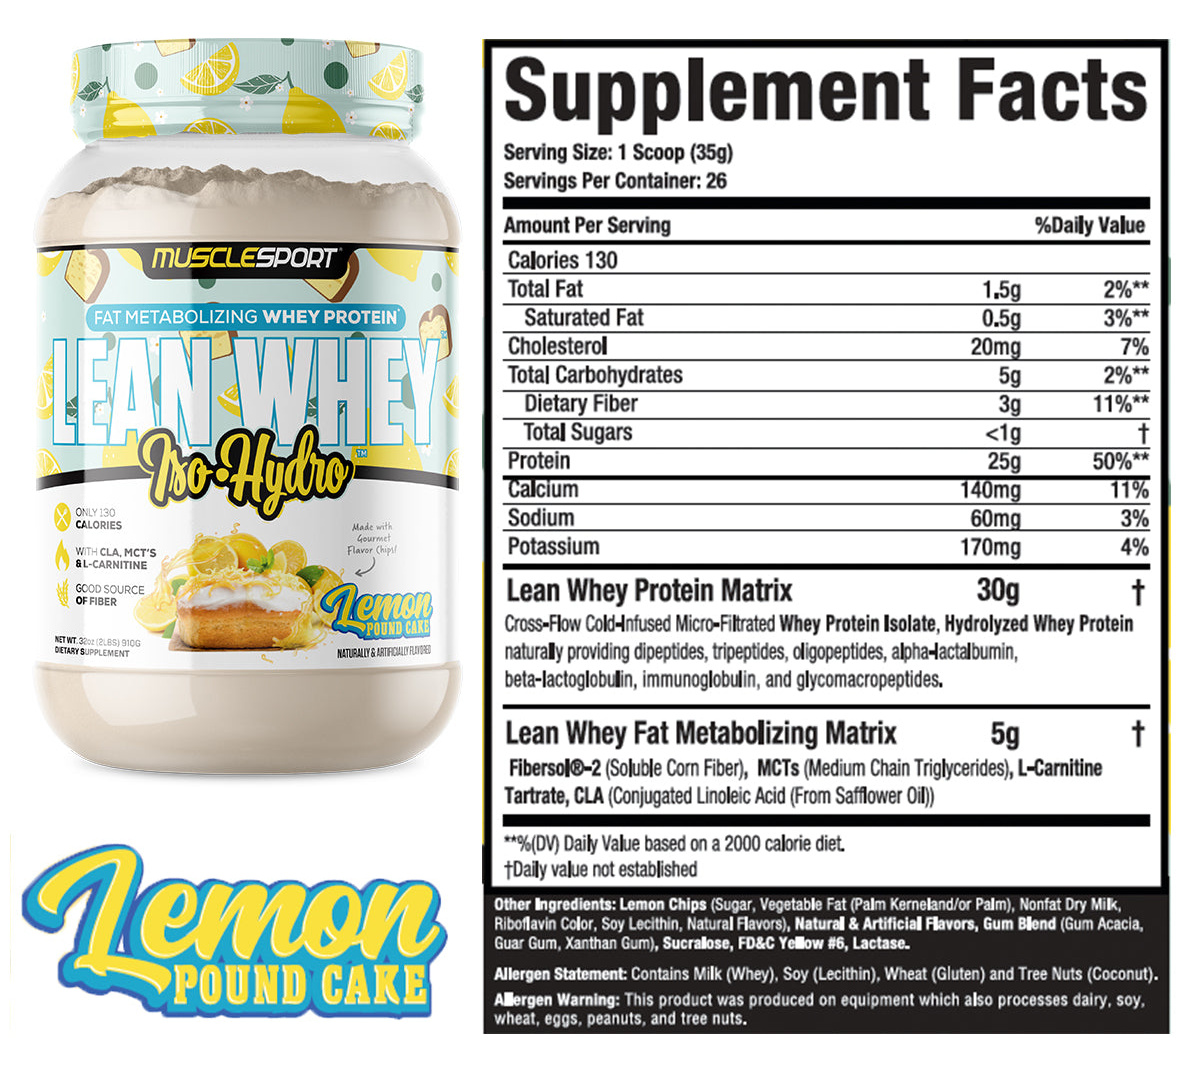 Musclesport Lean Whey Lemon Pound Cake Ingredients & Nutrition Facts